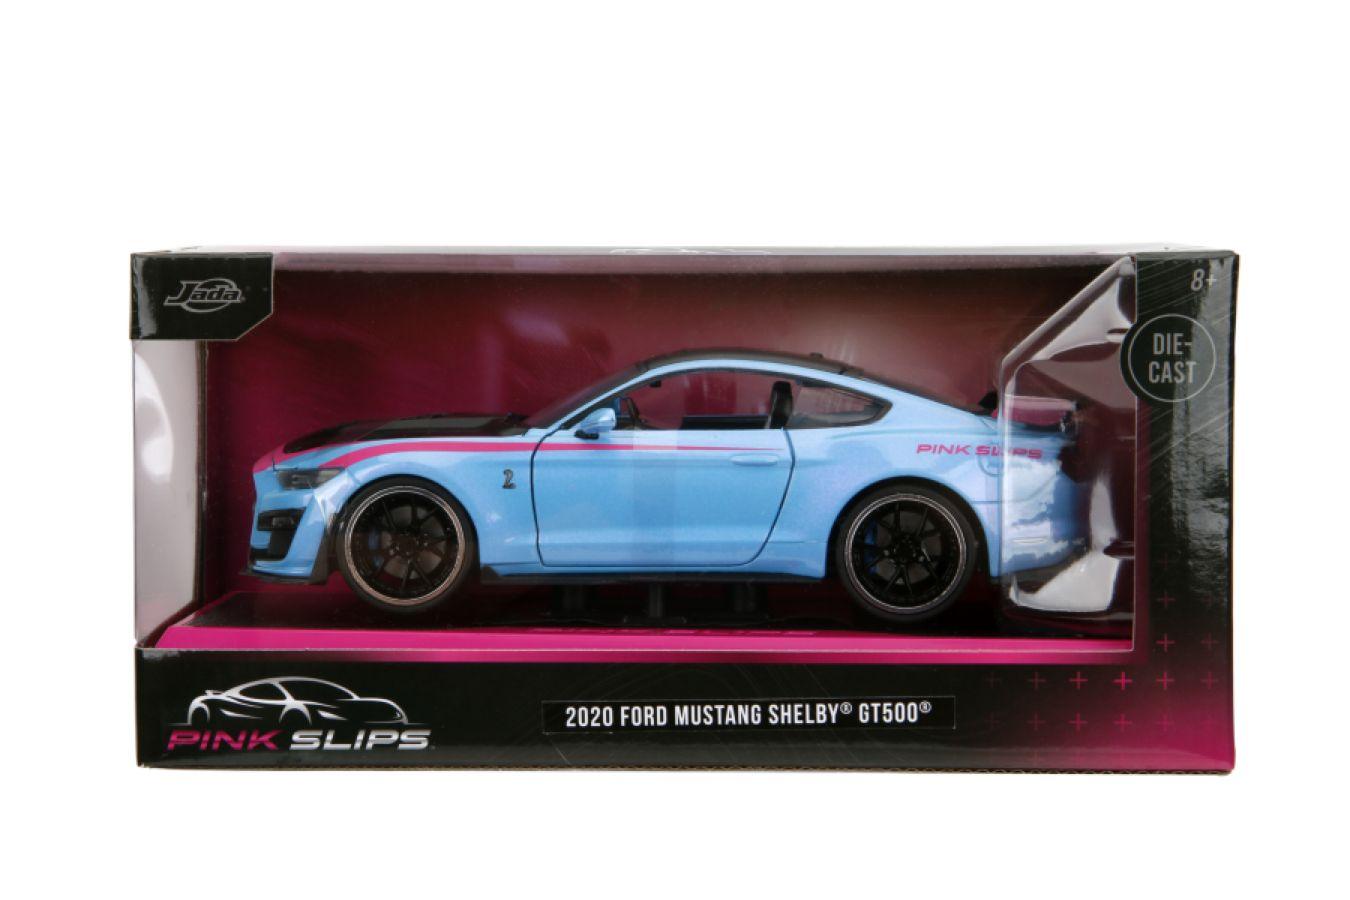 JAD35200 Pink Slips - 2020 Ford Mustang Shelby GT500 1:24 Scale Diecast Vehicle - Jada Toys - Titan Pop Culture